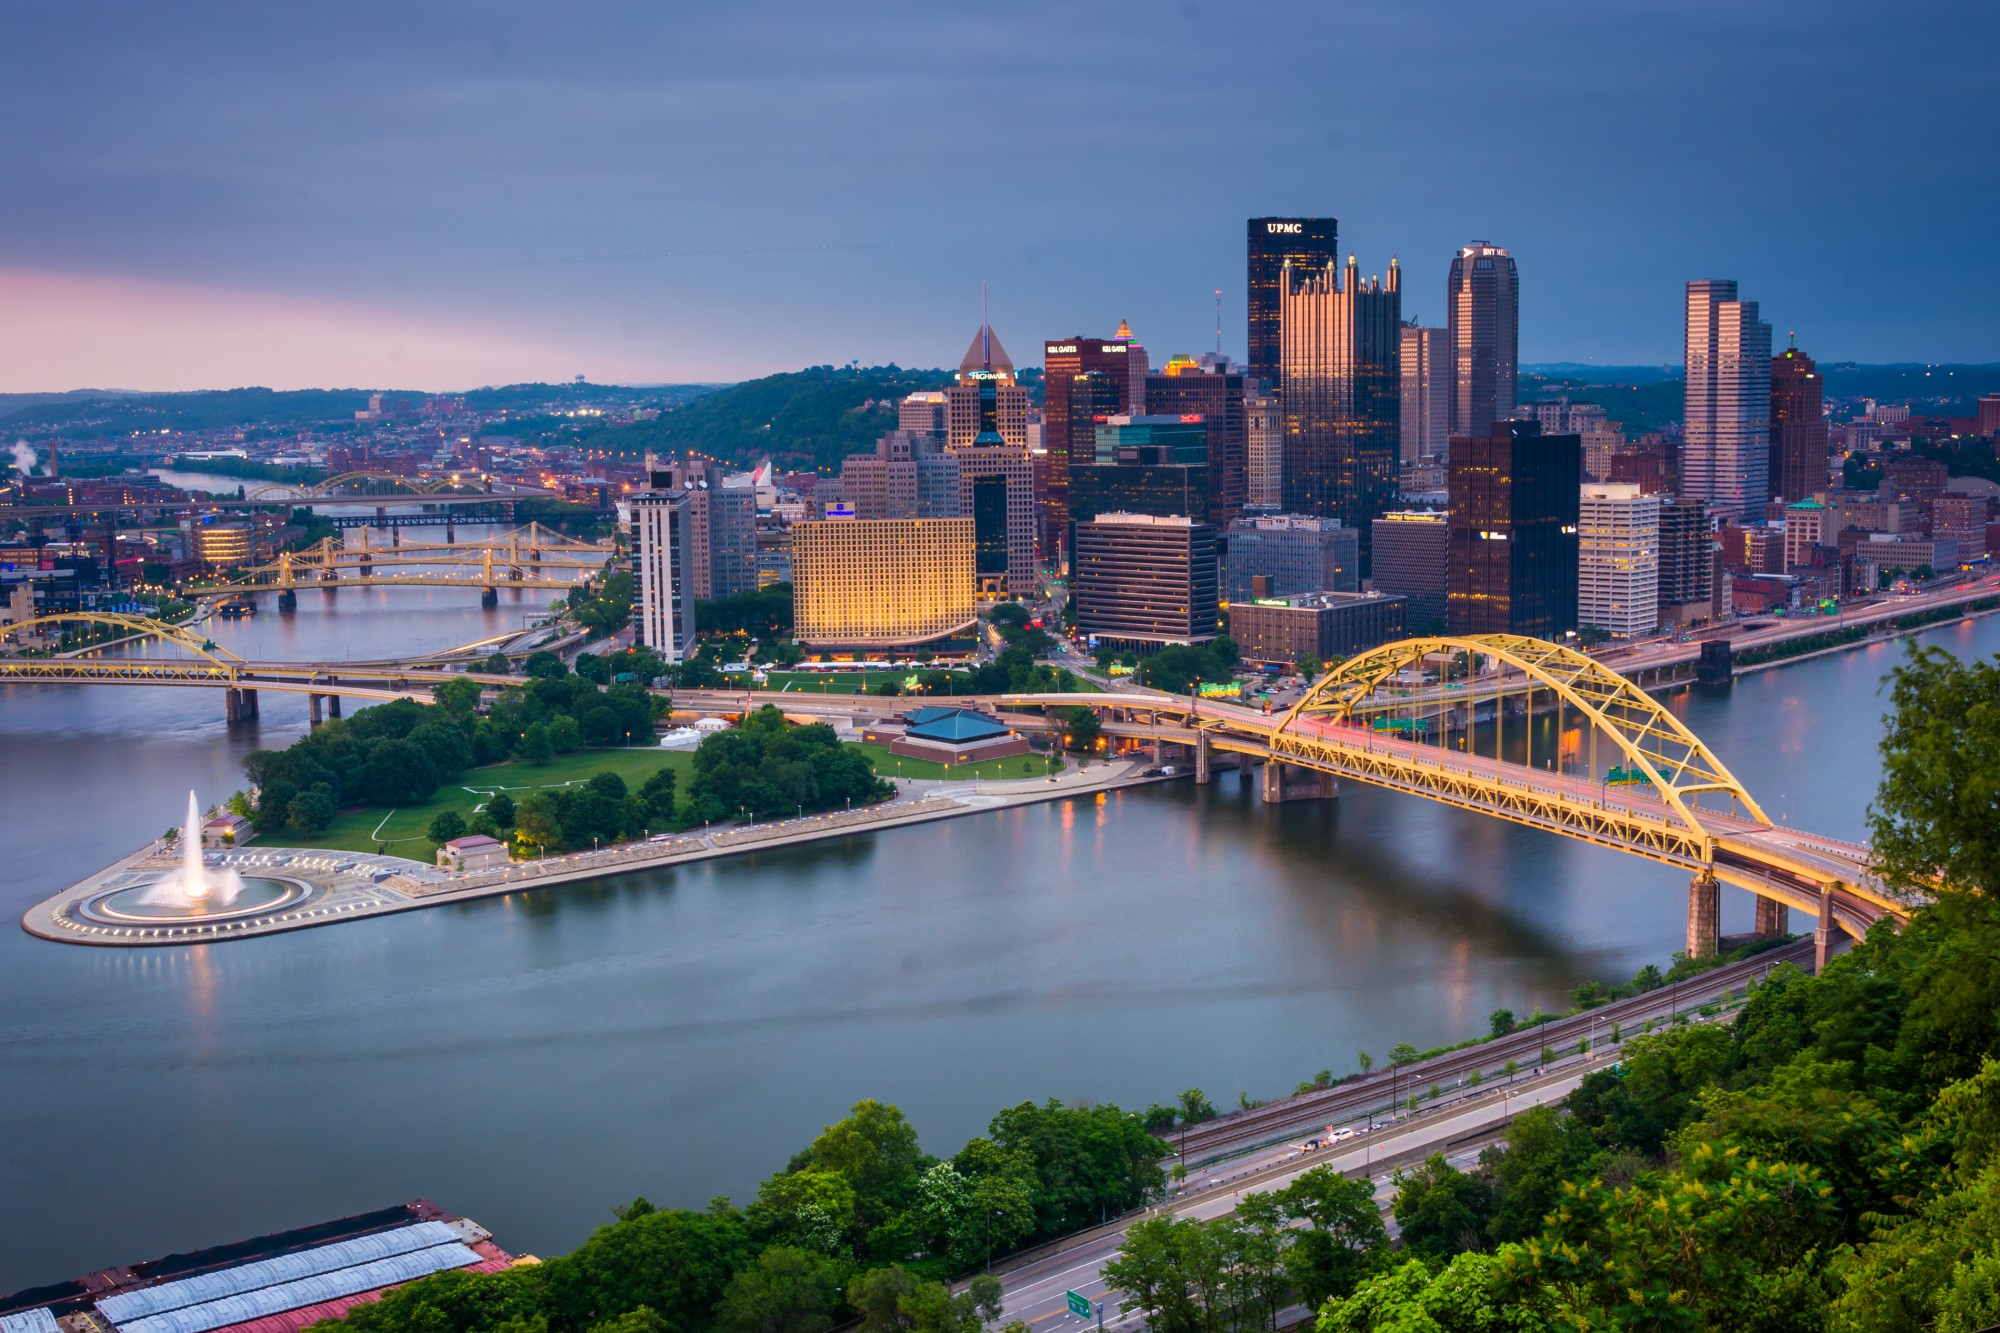 The mystery pittsburgh